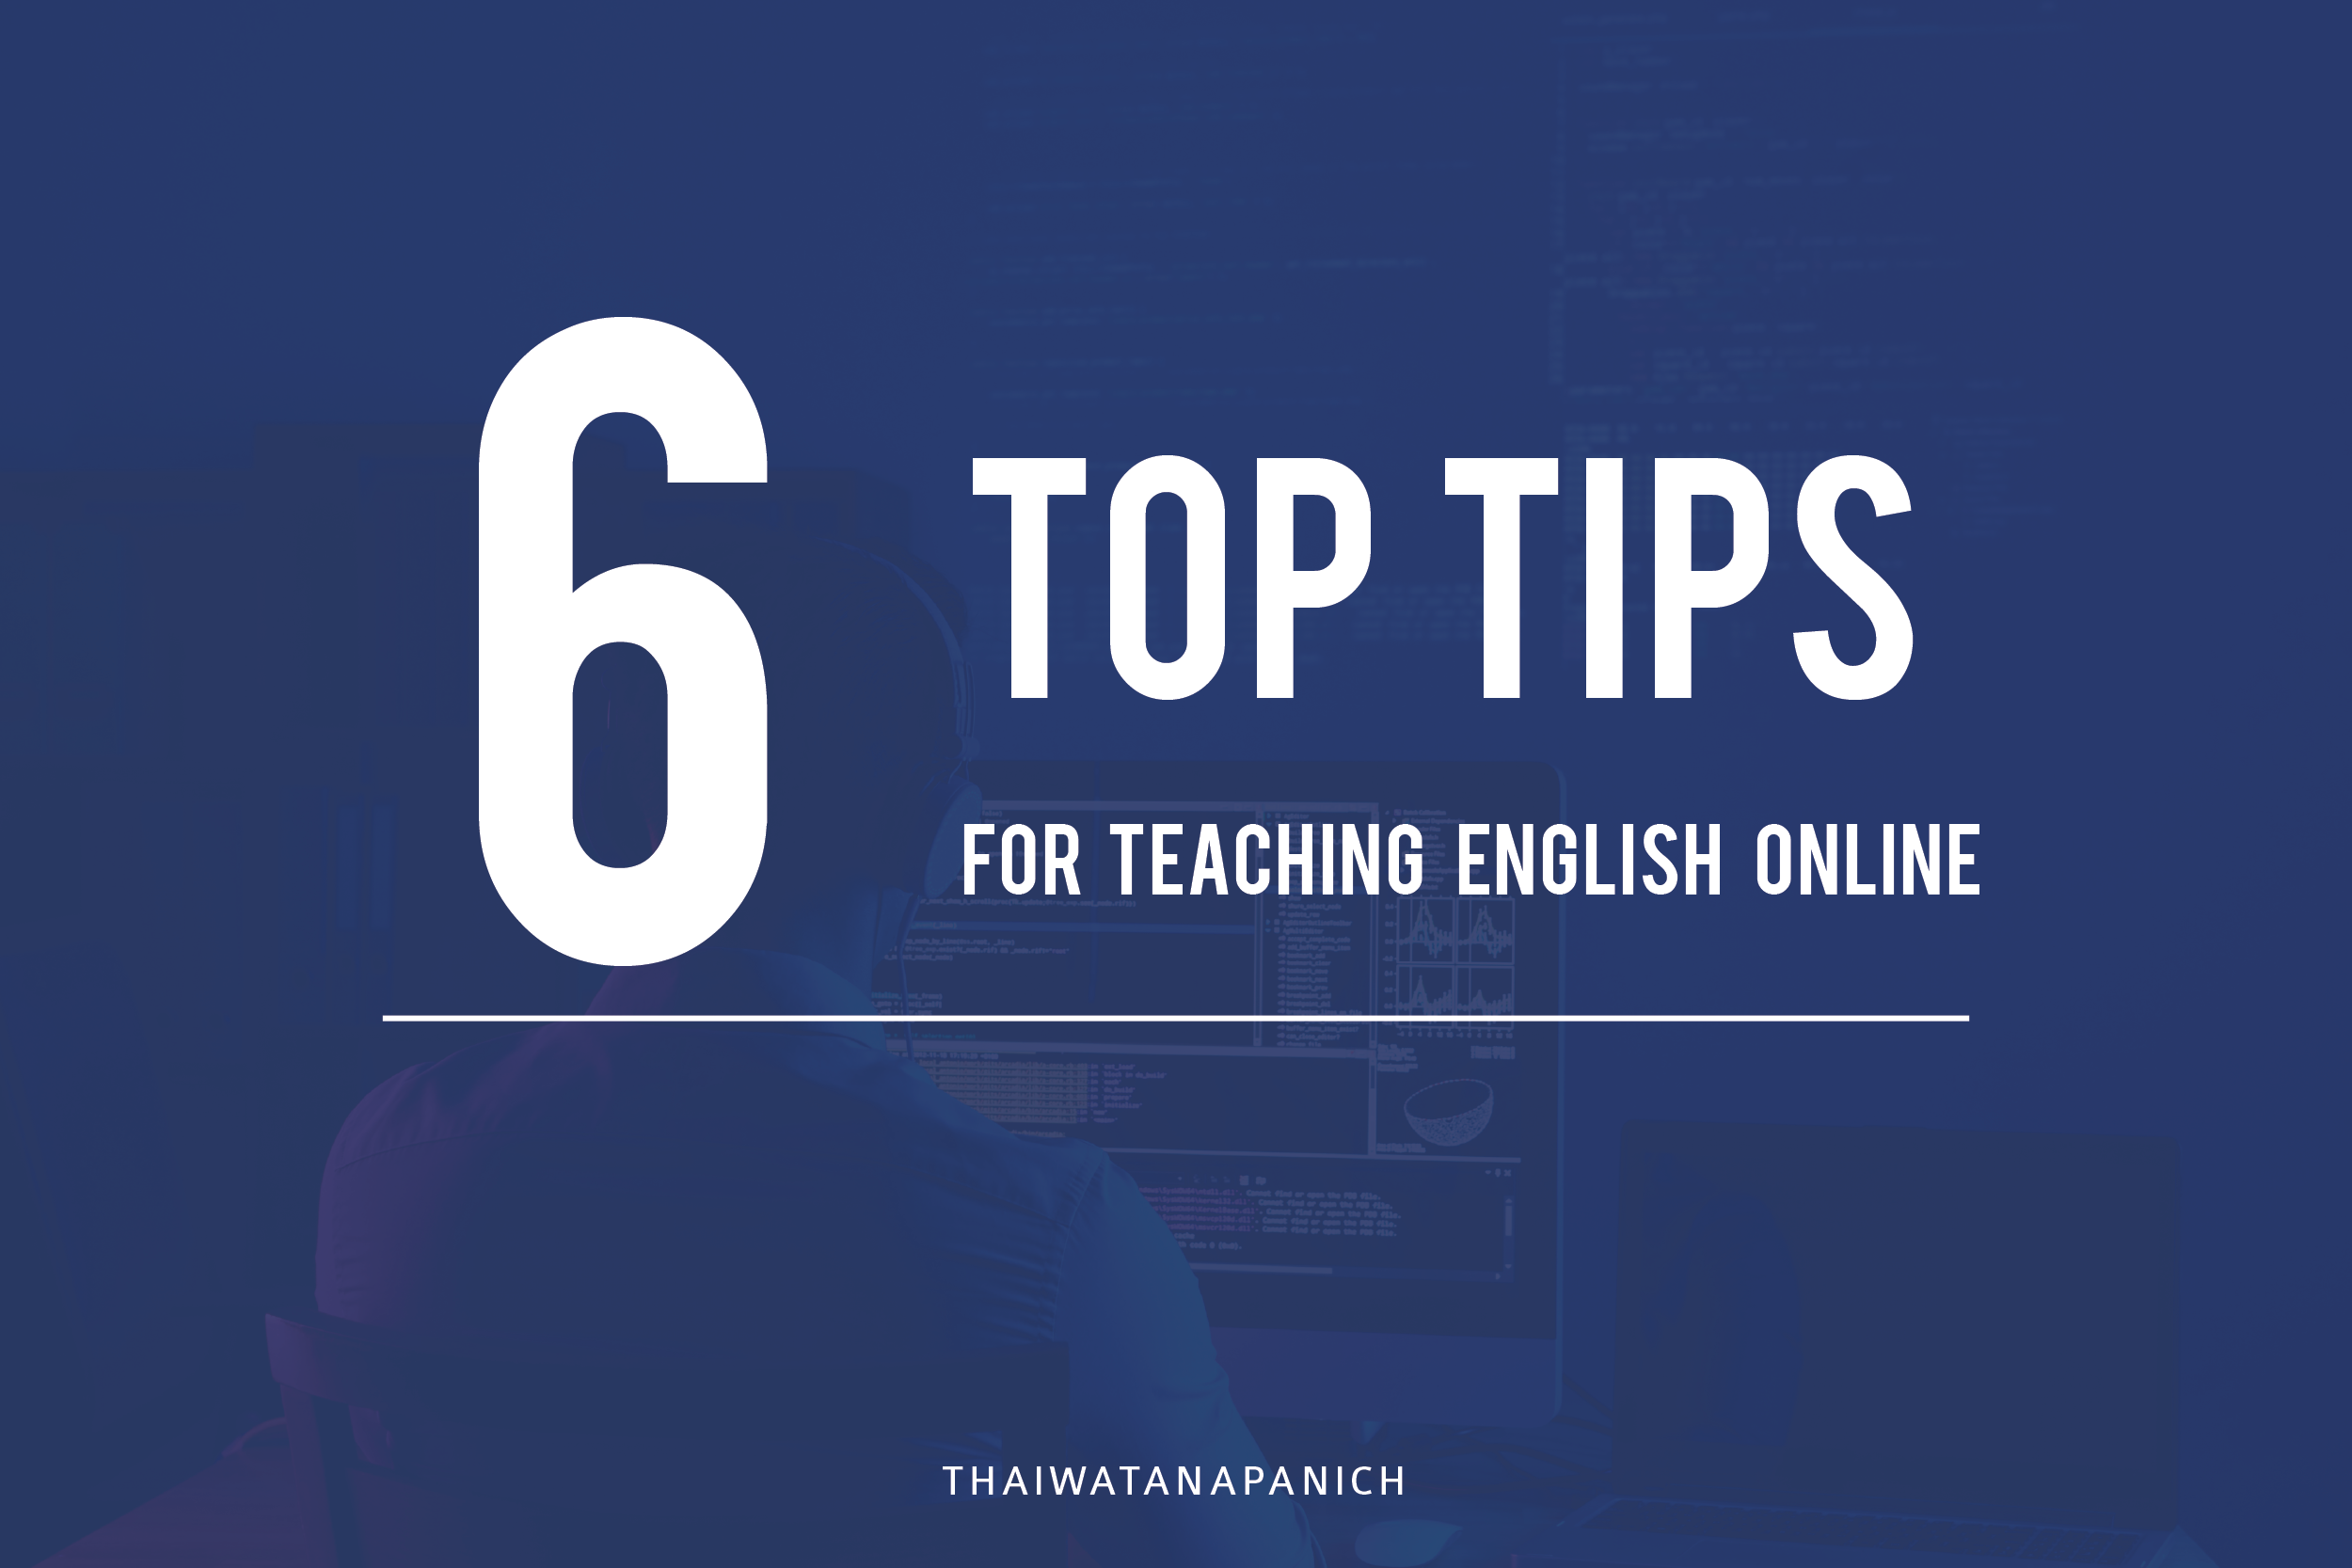 6 top tips for teaching English online